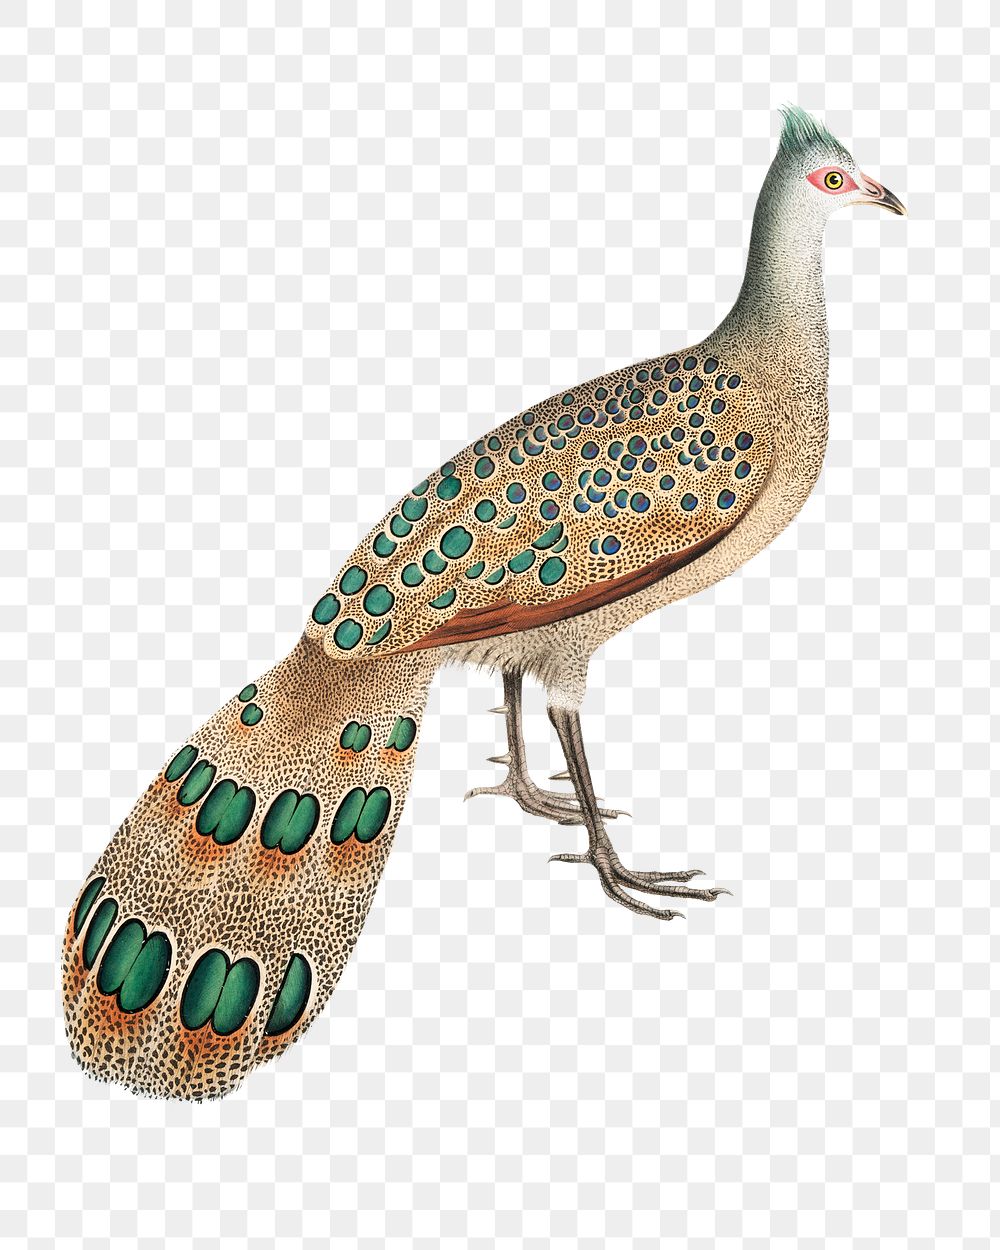 Hardwicke's polyplectron png sticker, vintage bird on transparent background